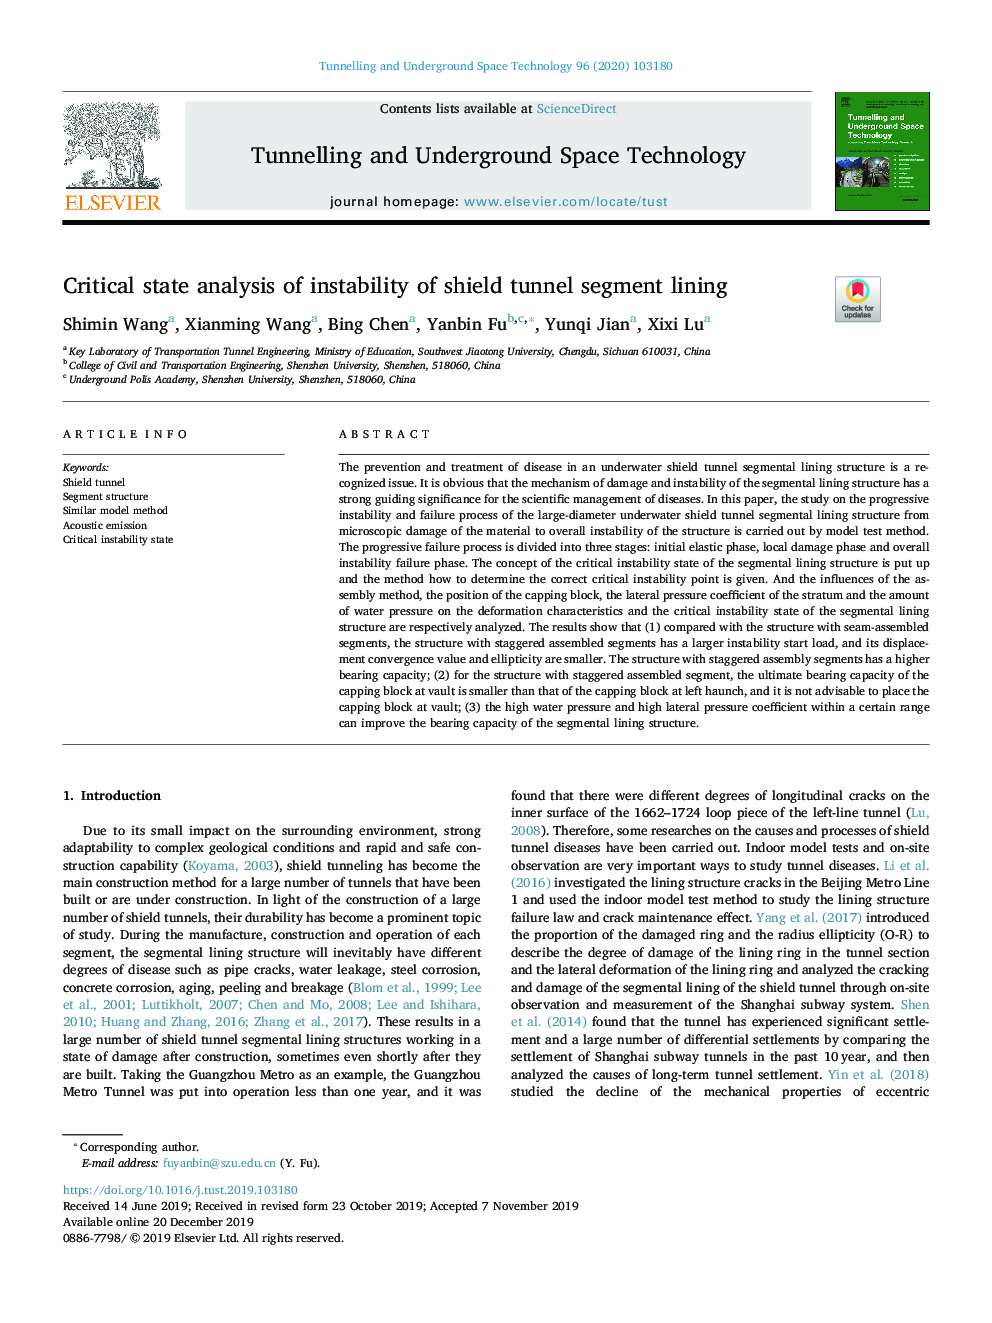 Critical state analysis of instability of shield tunnel segment lining